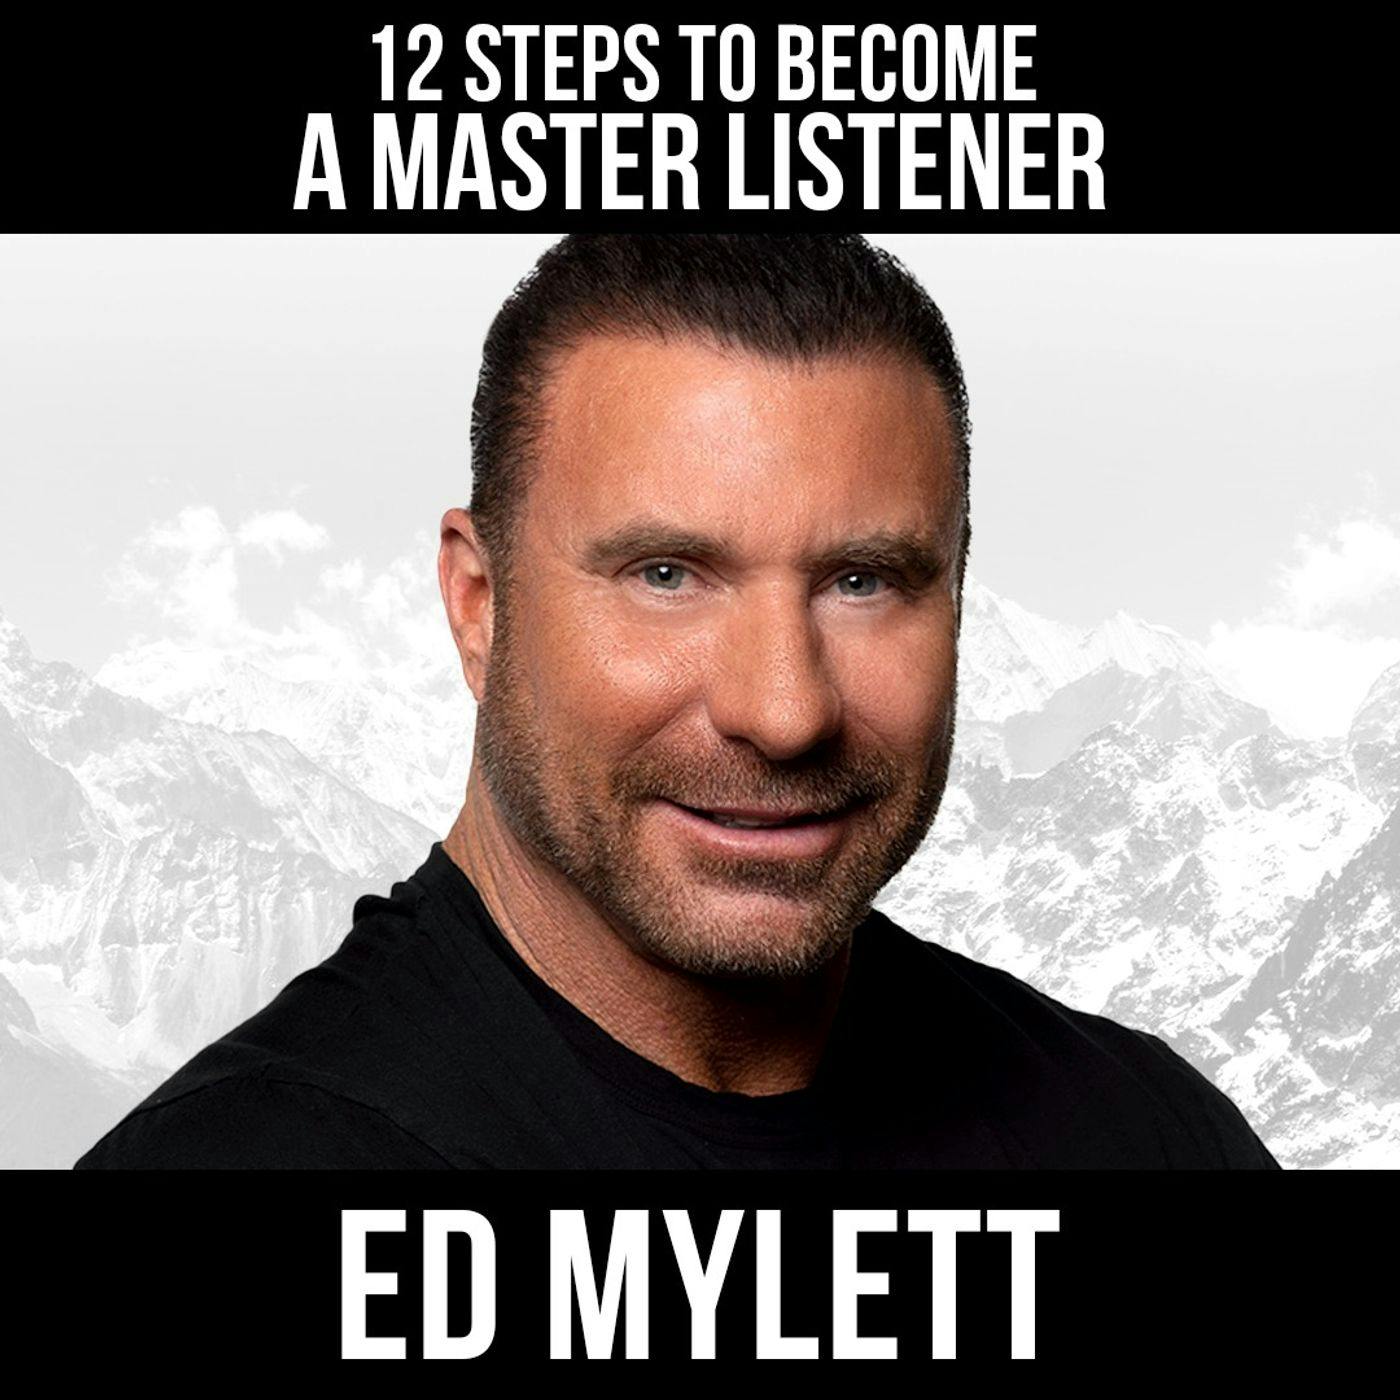 12 Steps To Become A Master Listener